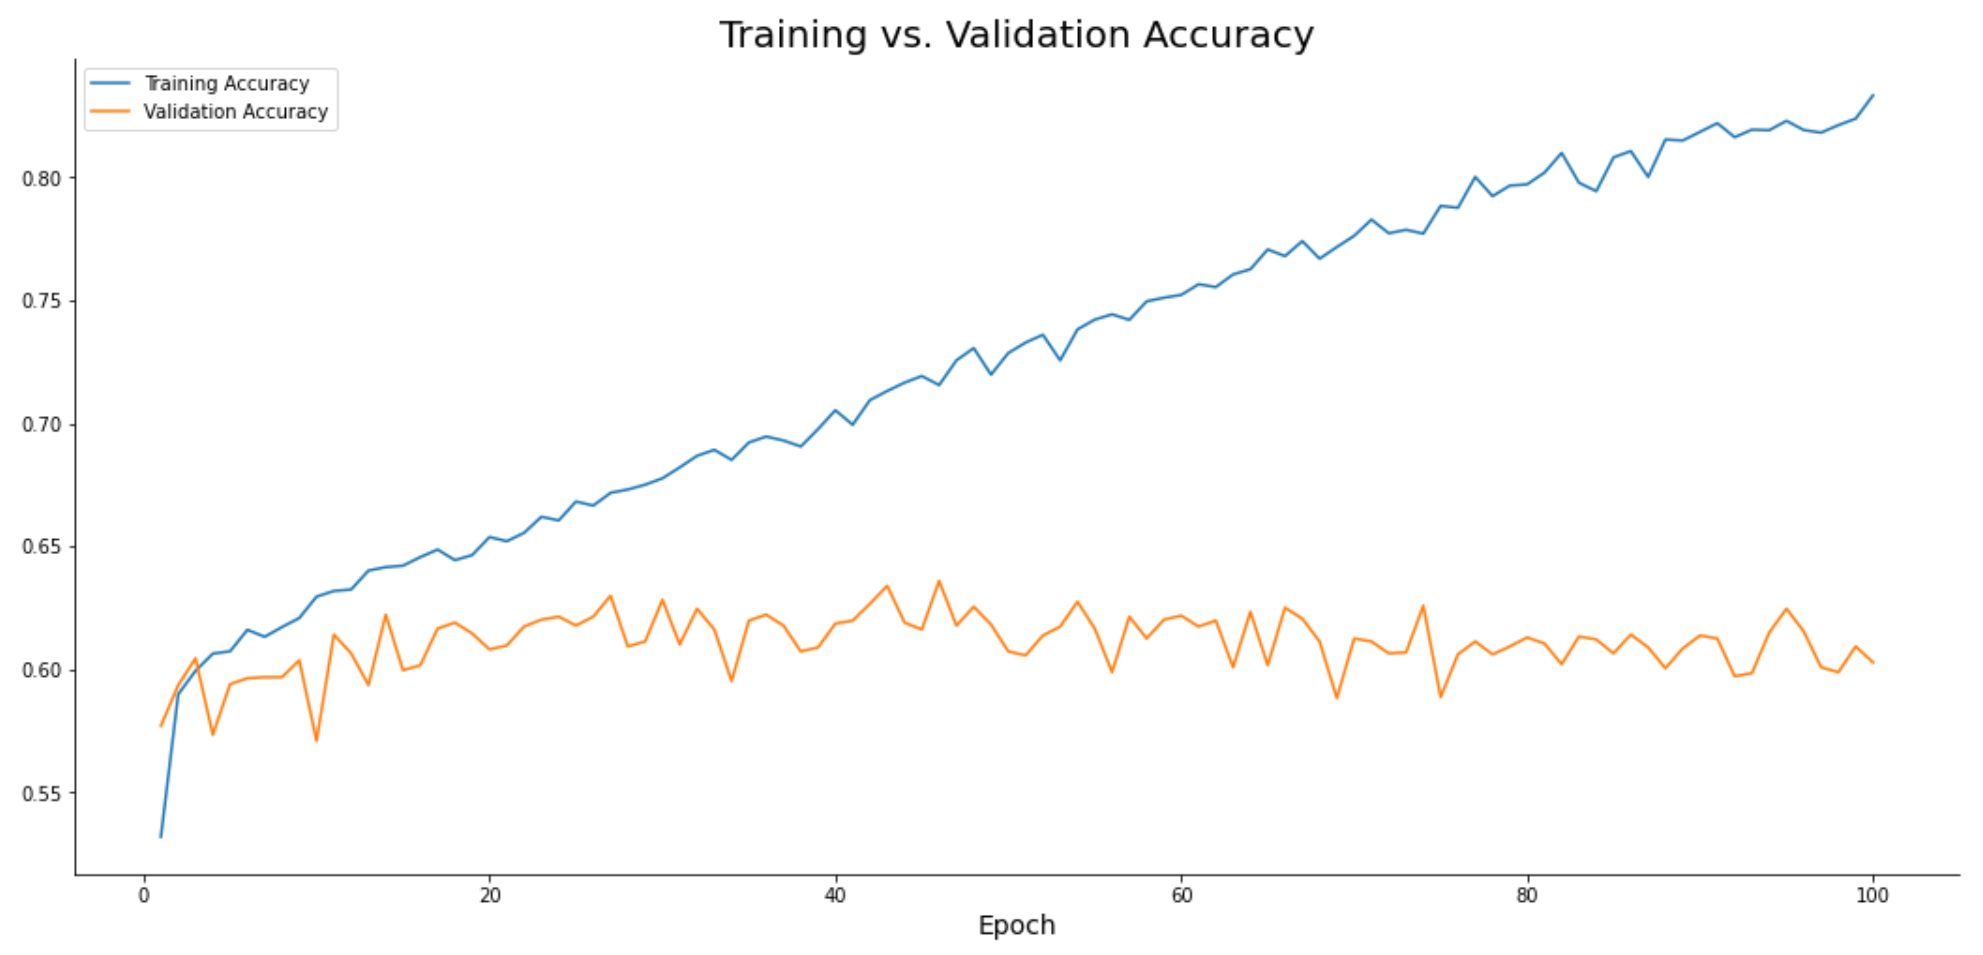 Image 14 — Training accuracy vs. validation accuracy (image by author)